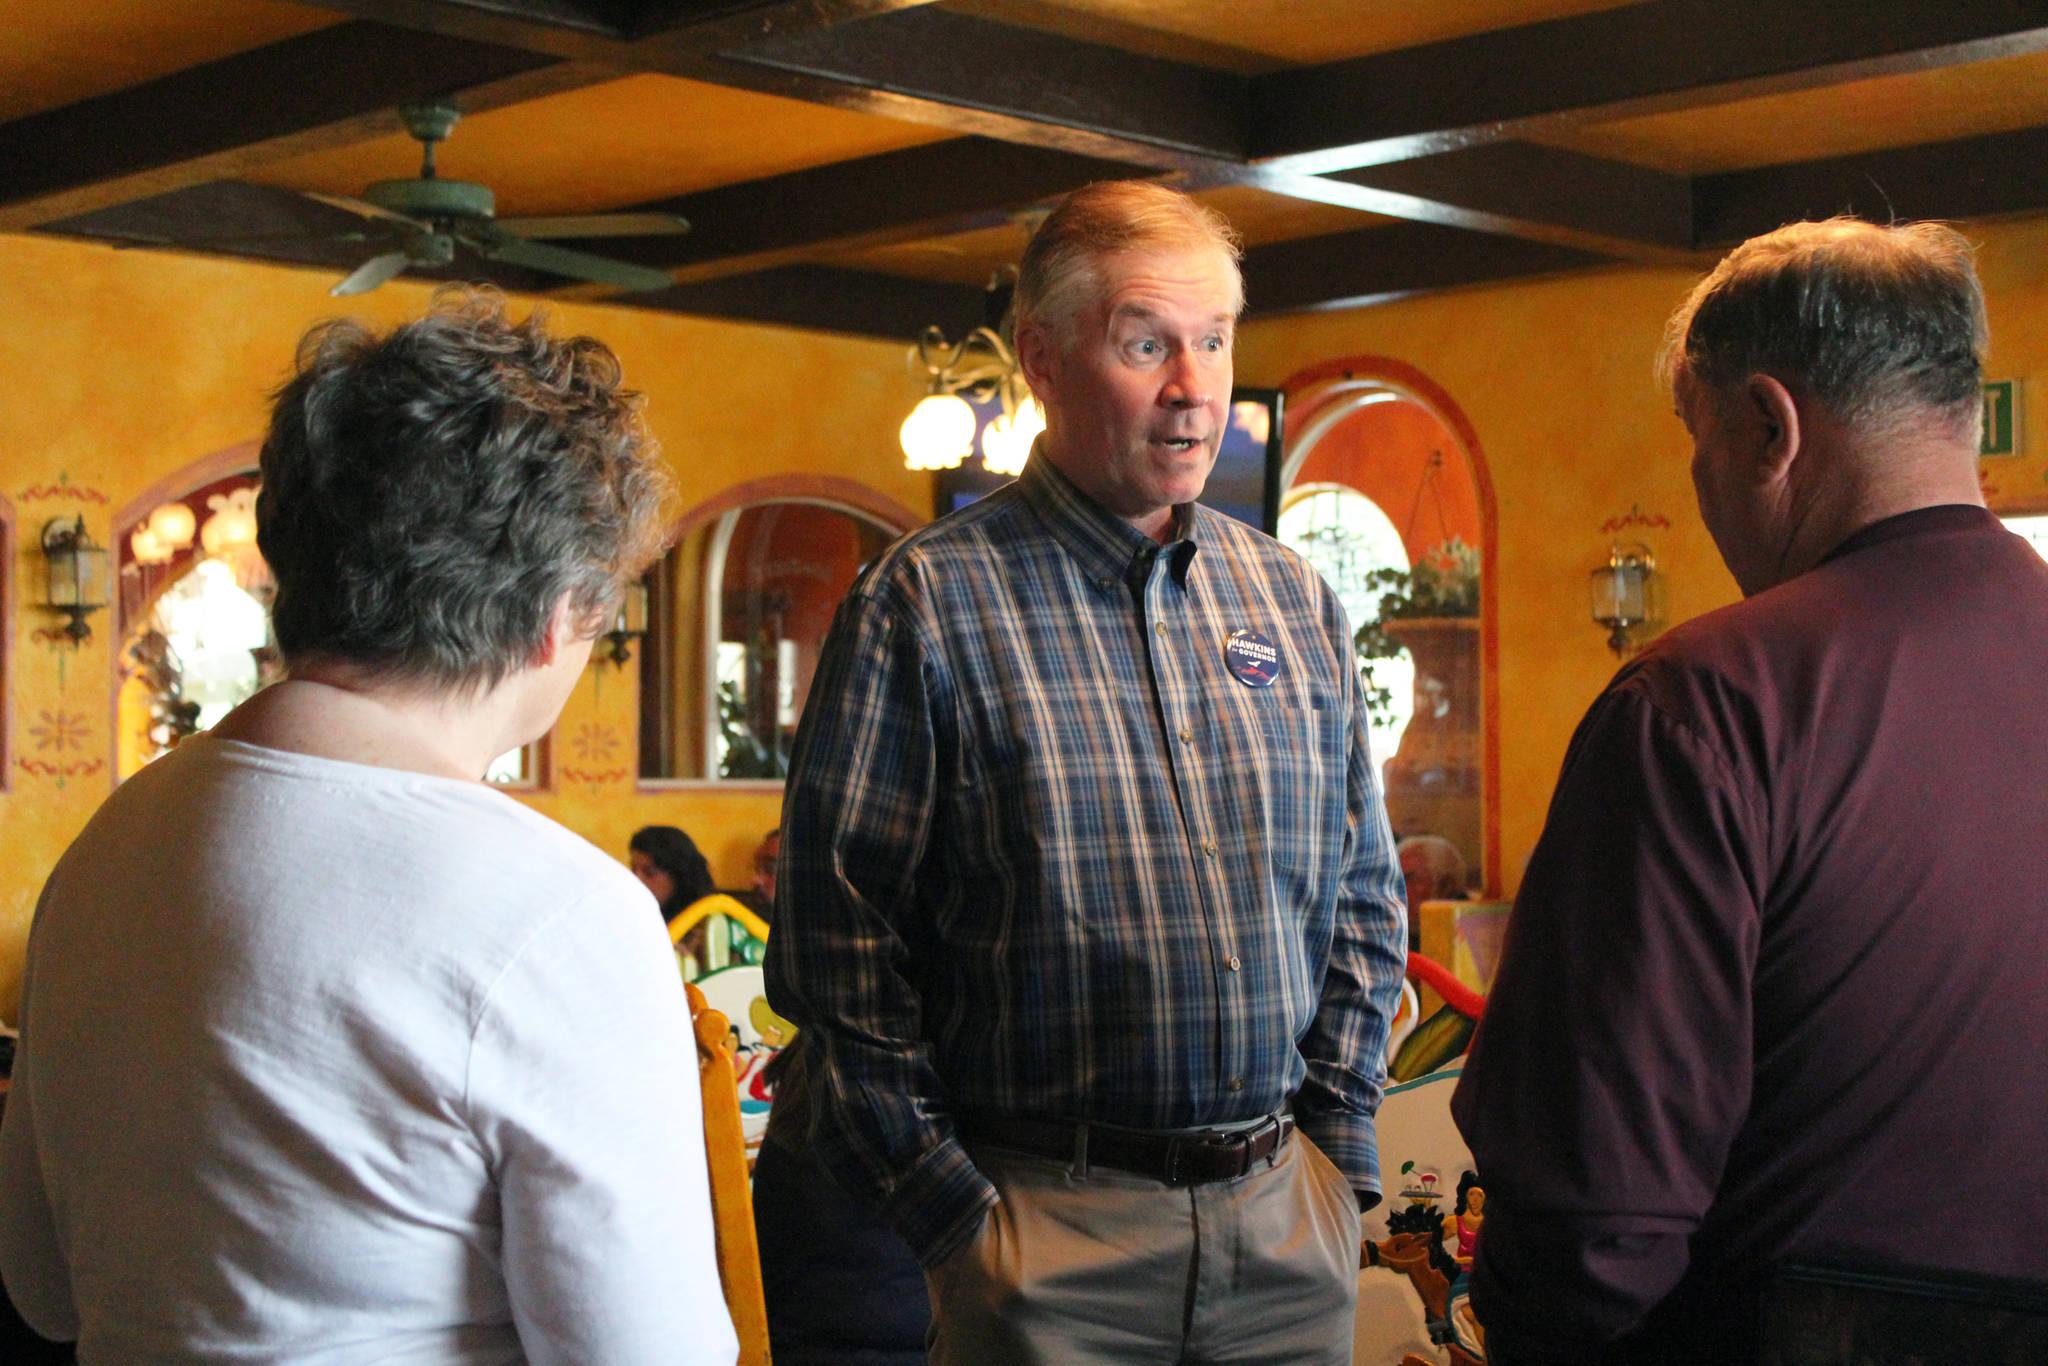 Scott Hawkins, a Republican candidate for Alaska governor, talks with local residents before a campaign pitch Thursday, June 7, 2018 at Don Jose’s in Homer, Alaska. (Photo by Megan Pacer/Homer Alaska. (Photo by Megan Pacer/Homer News)